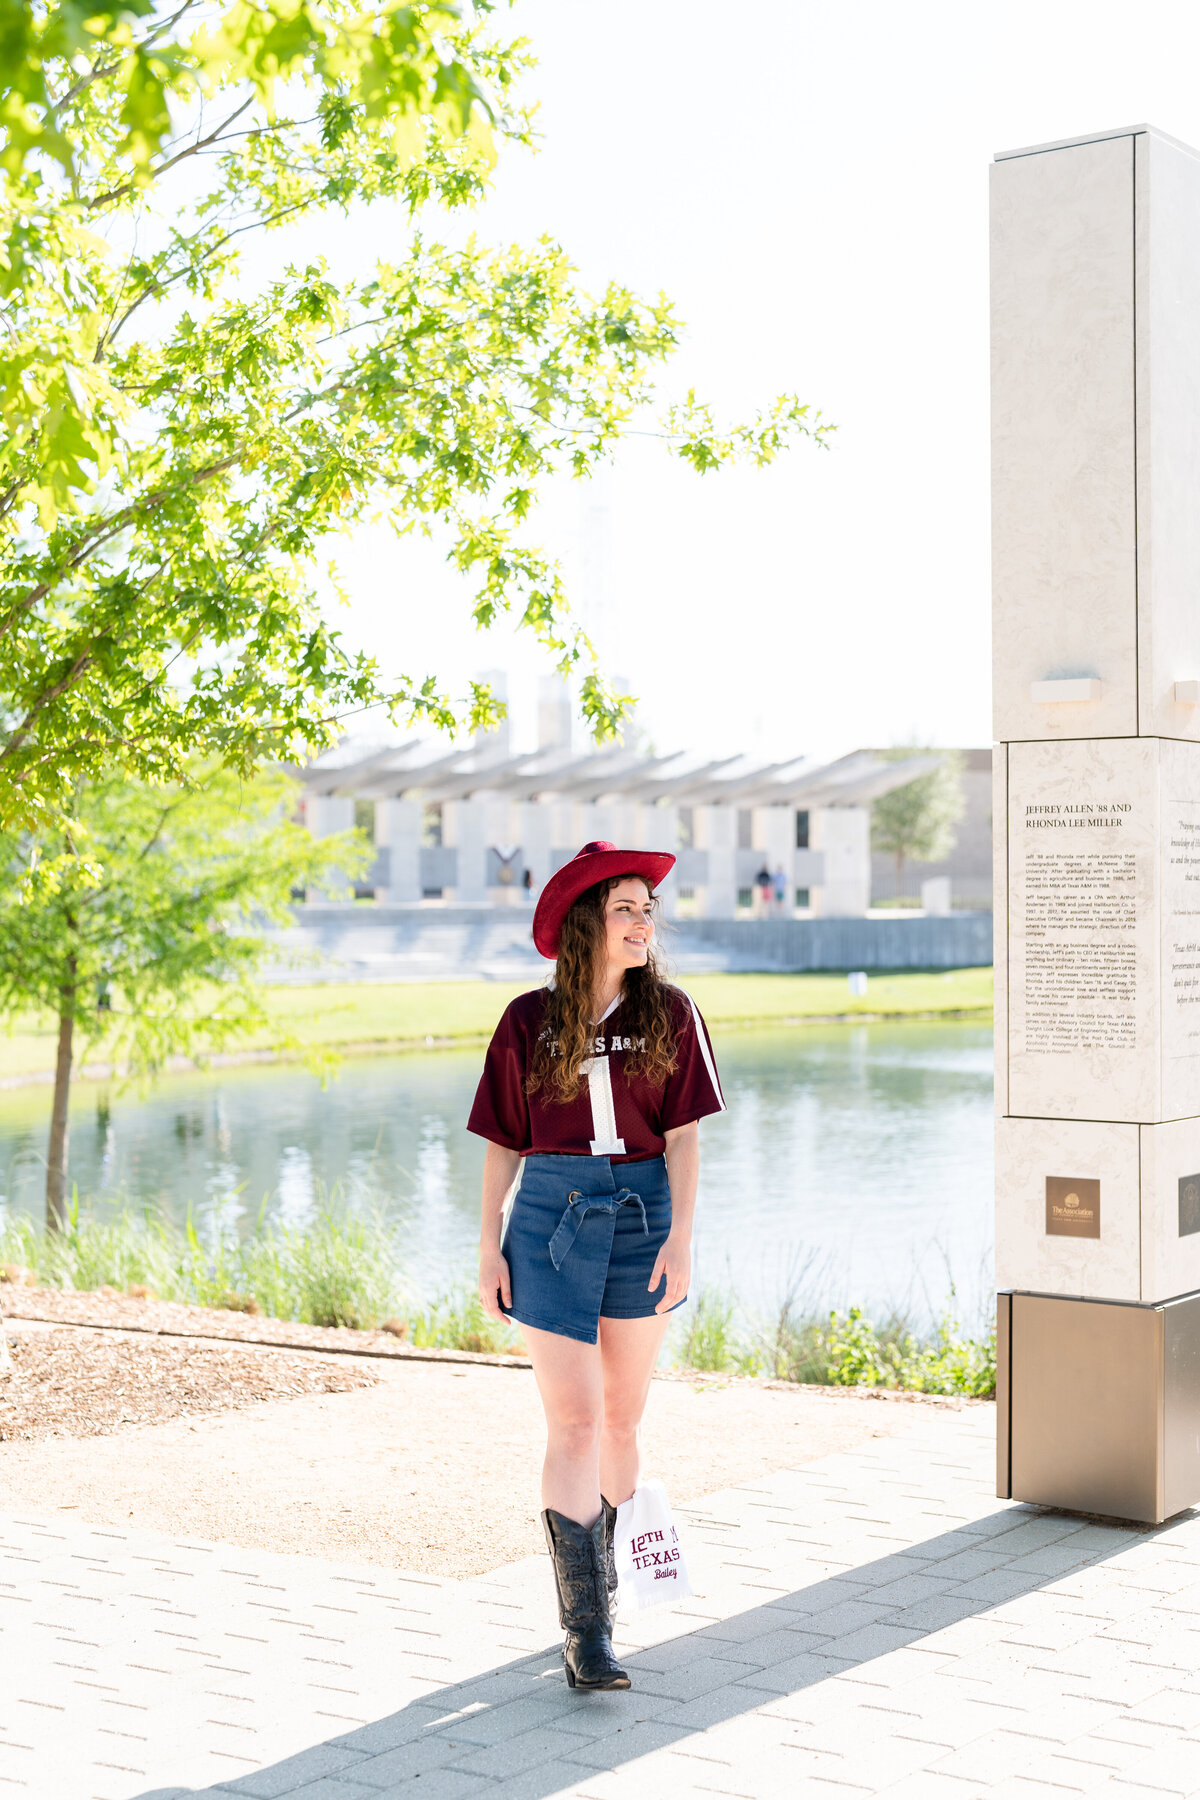 Texas A&M senior girl walking and laughing away while wearing maroon cowboy hat, jersey, boots and jean skirt in Aggie Park